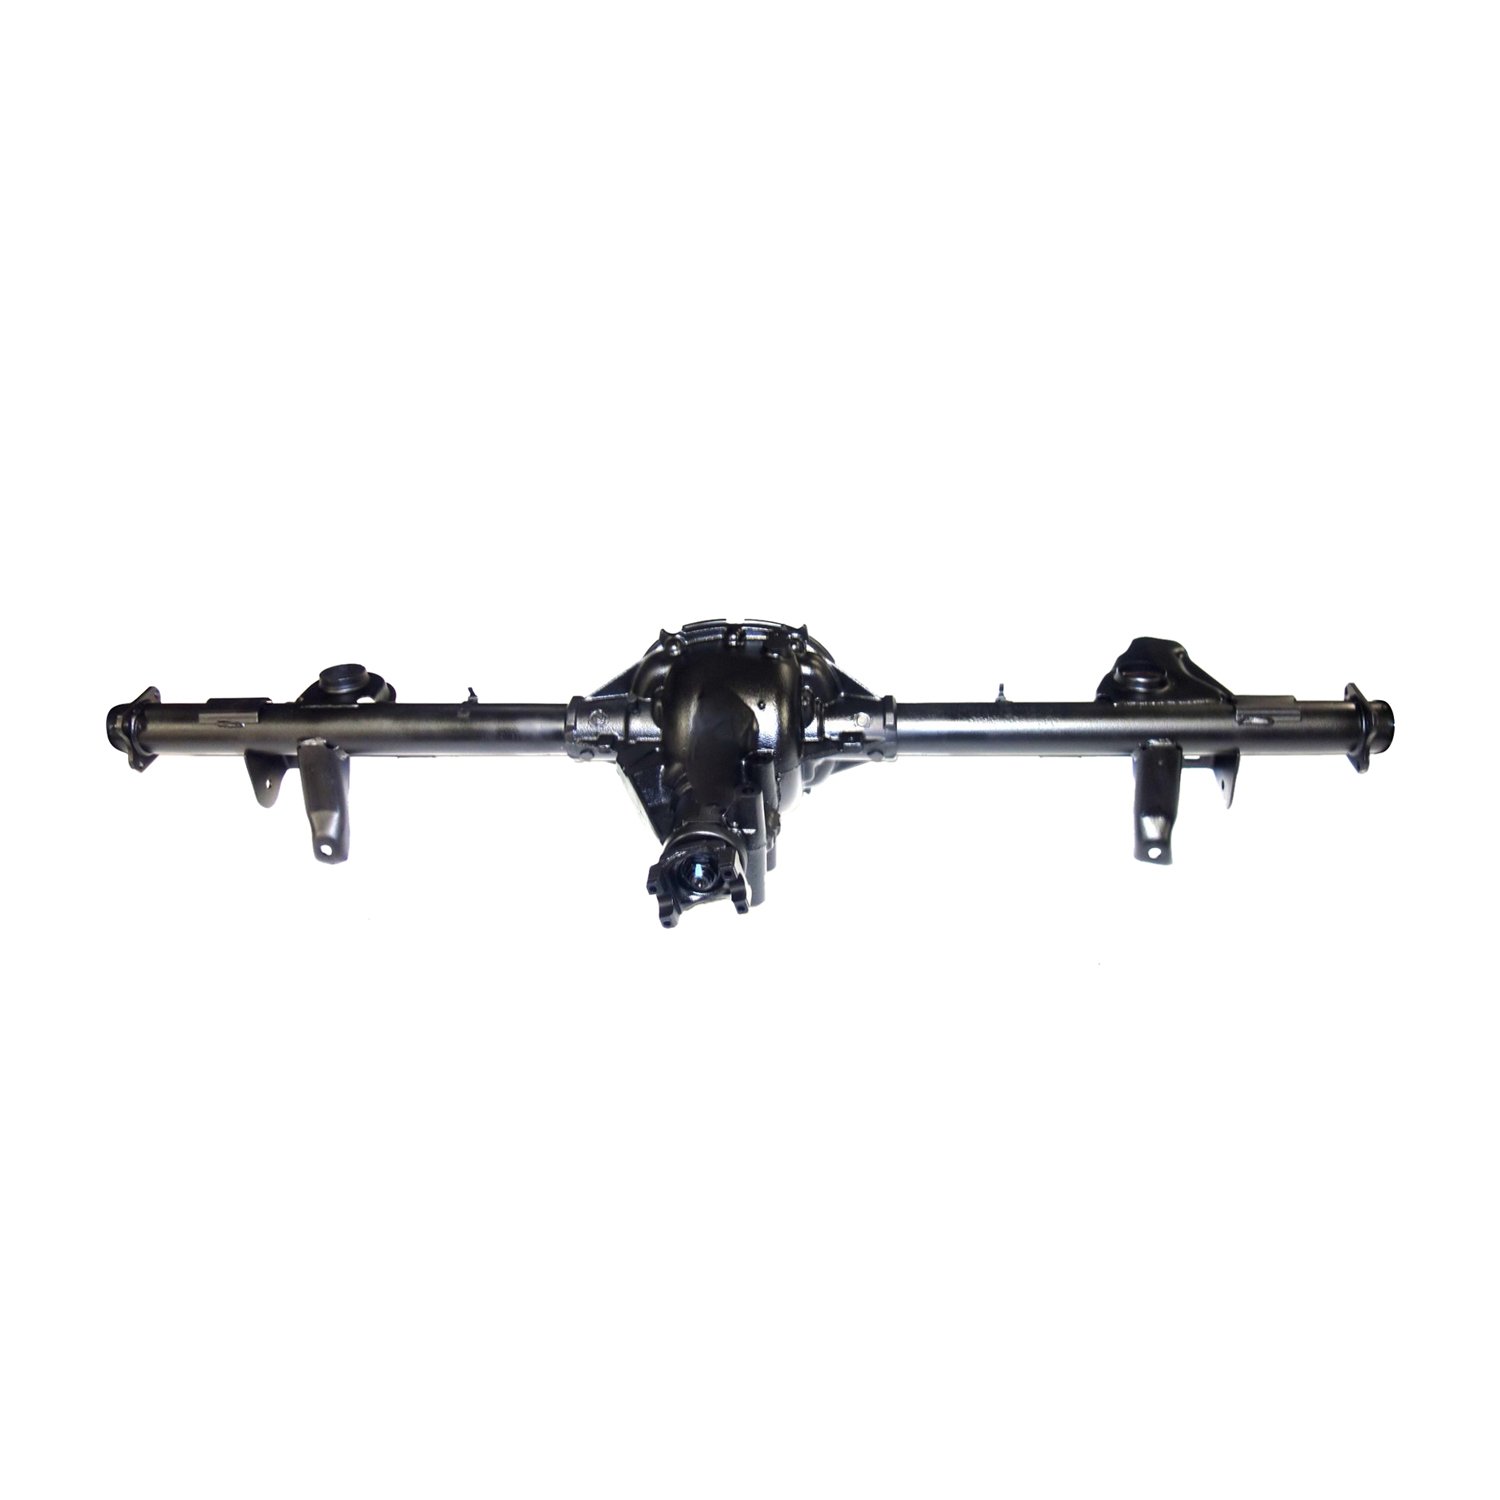 Remanufactured Axle Assy for GM 7.5" 98-03 S10 & S15 4.11 , 2wd, Chassis Pkg, Posi LSD